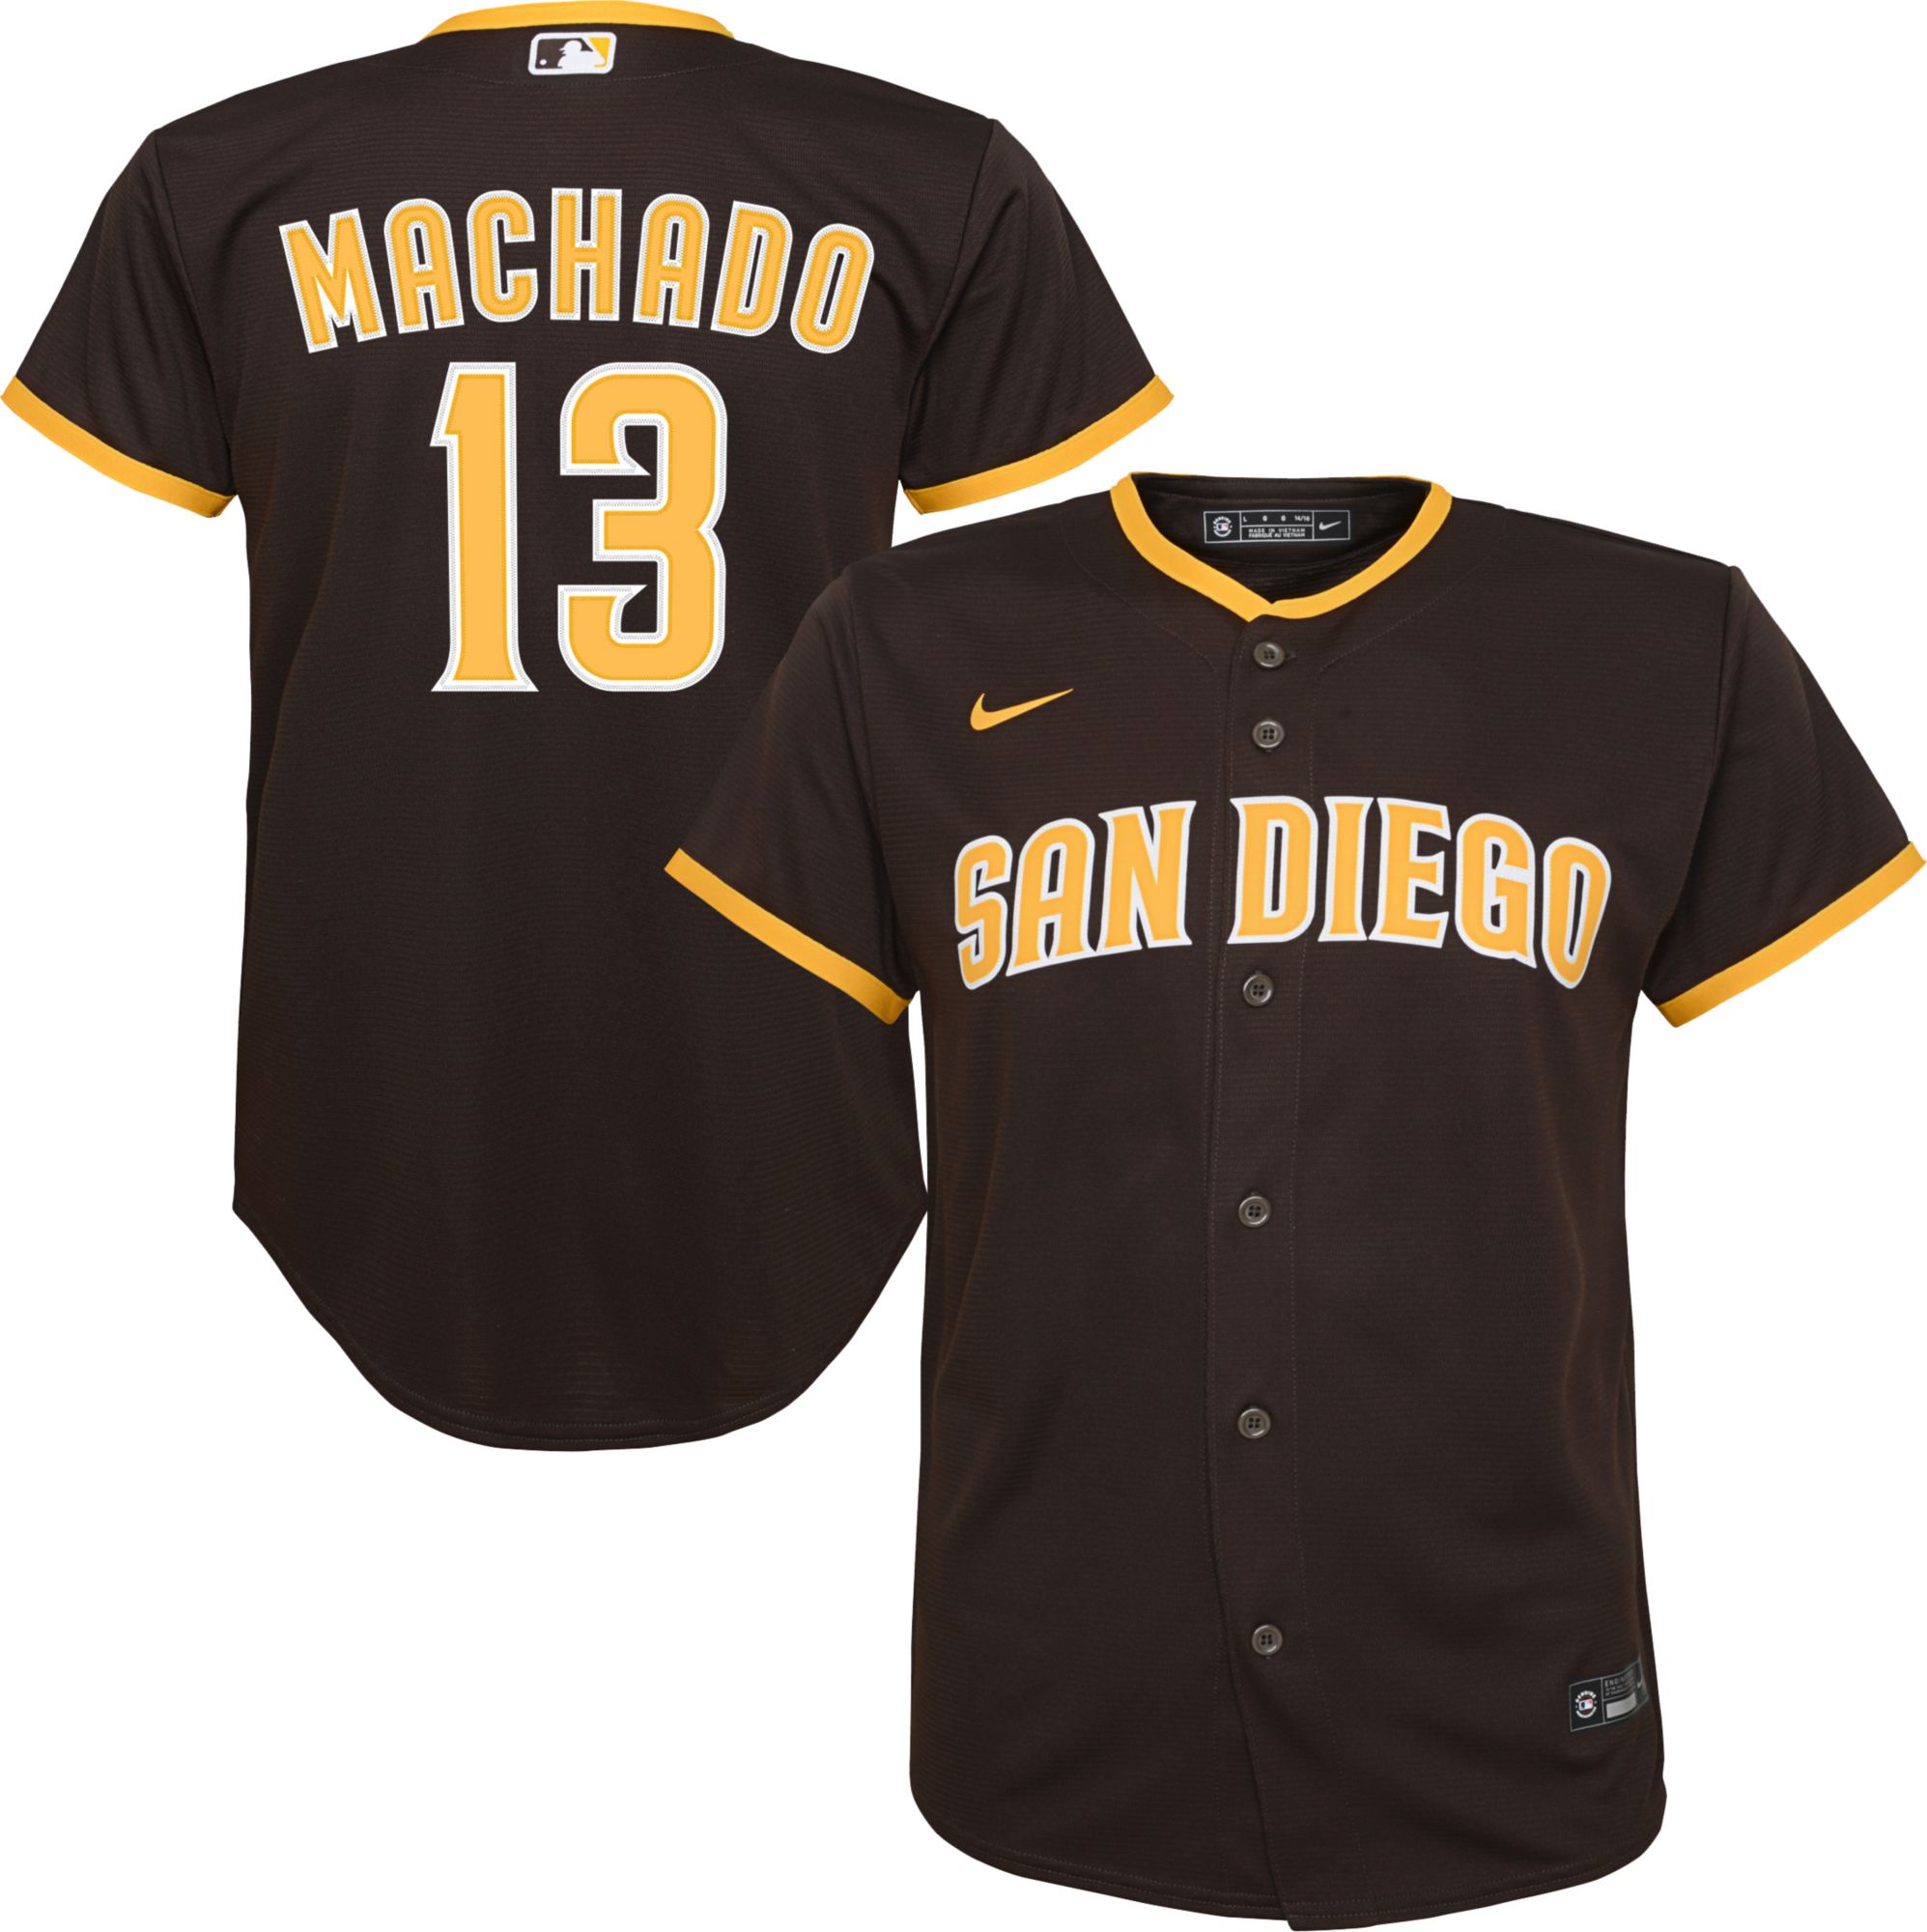 padres 2020 jerseys for sale